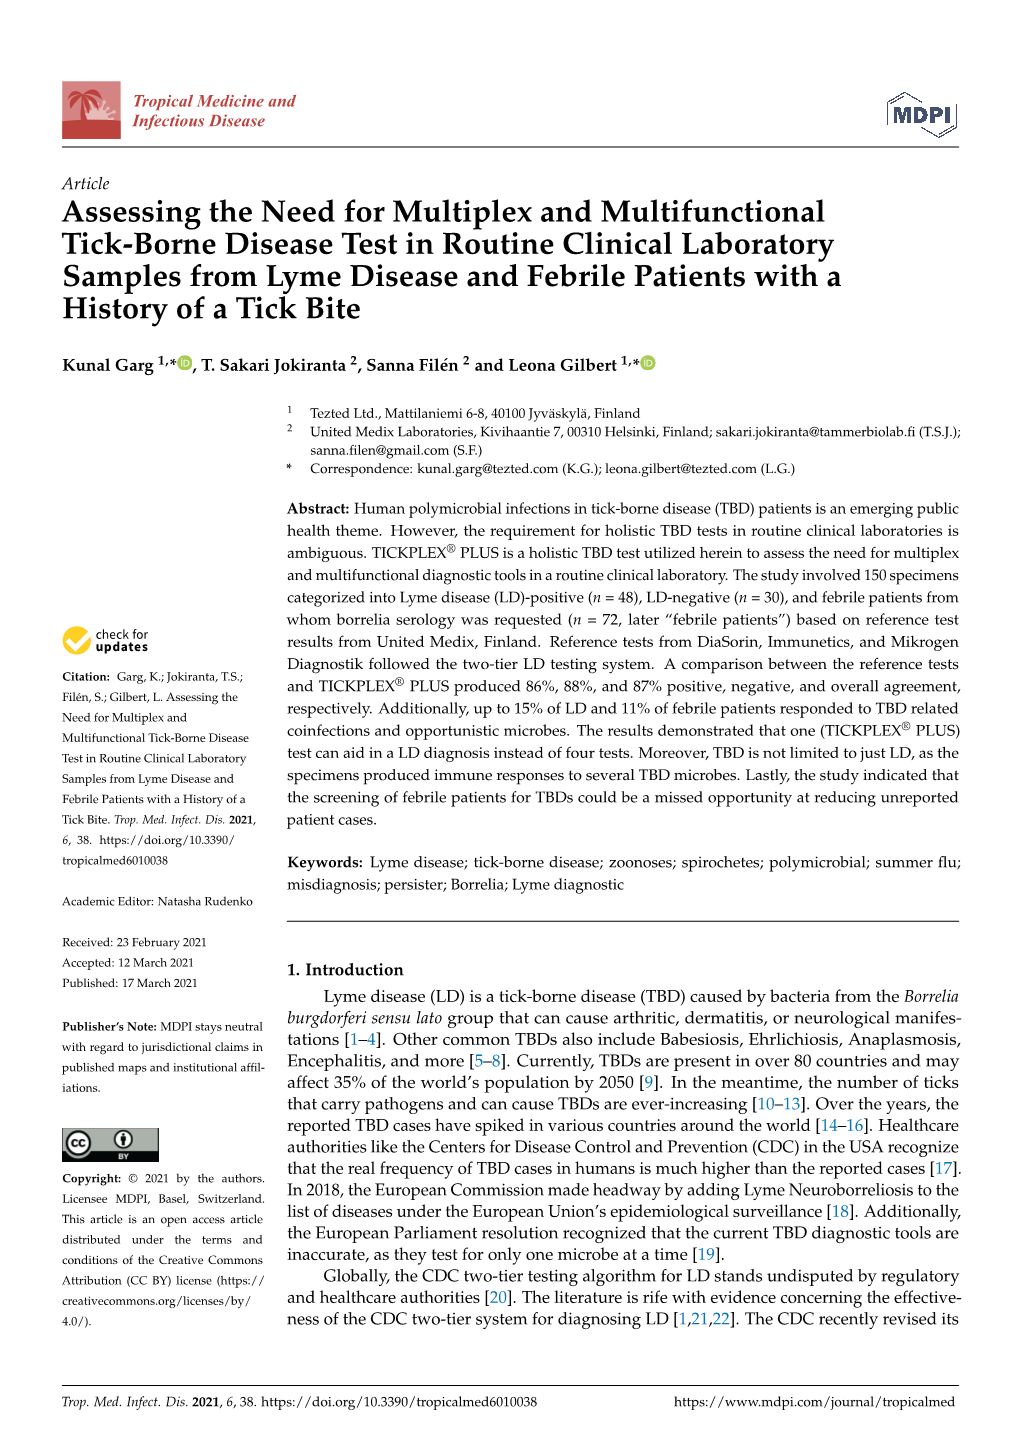 Assessing the Need for Multiplex and Multifunctional Tick-Borne Disease Test in Routine Clinical Laboratory Samples from Lyme Di